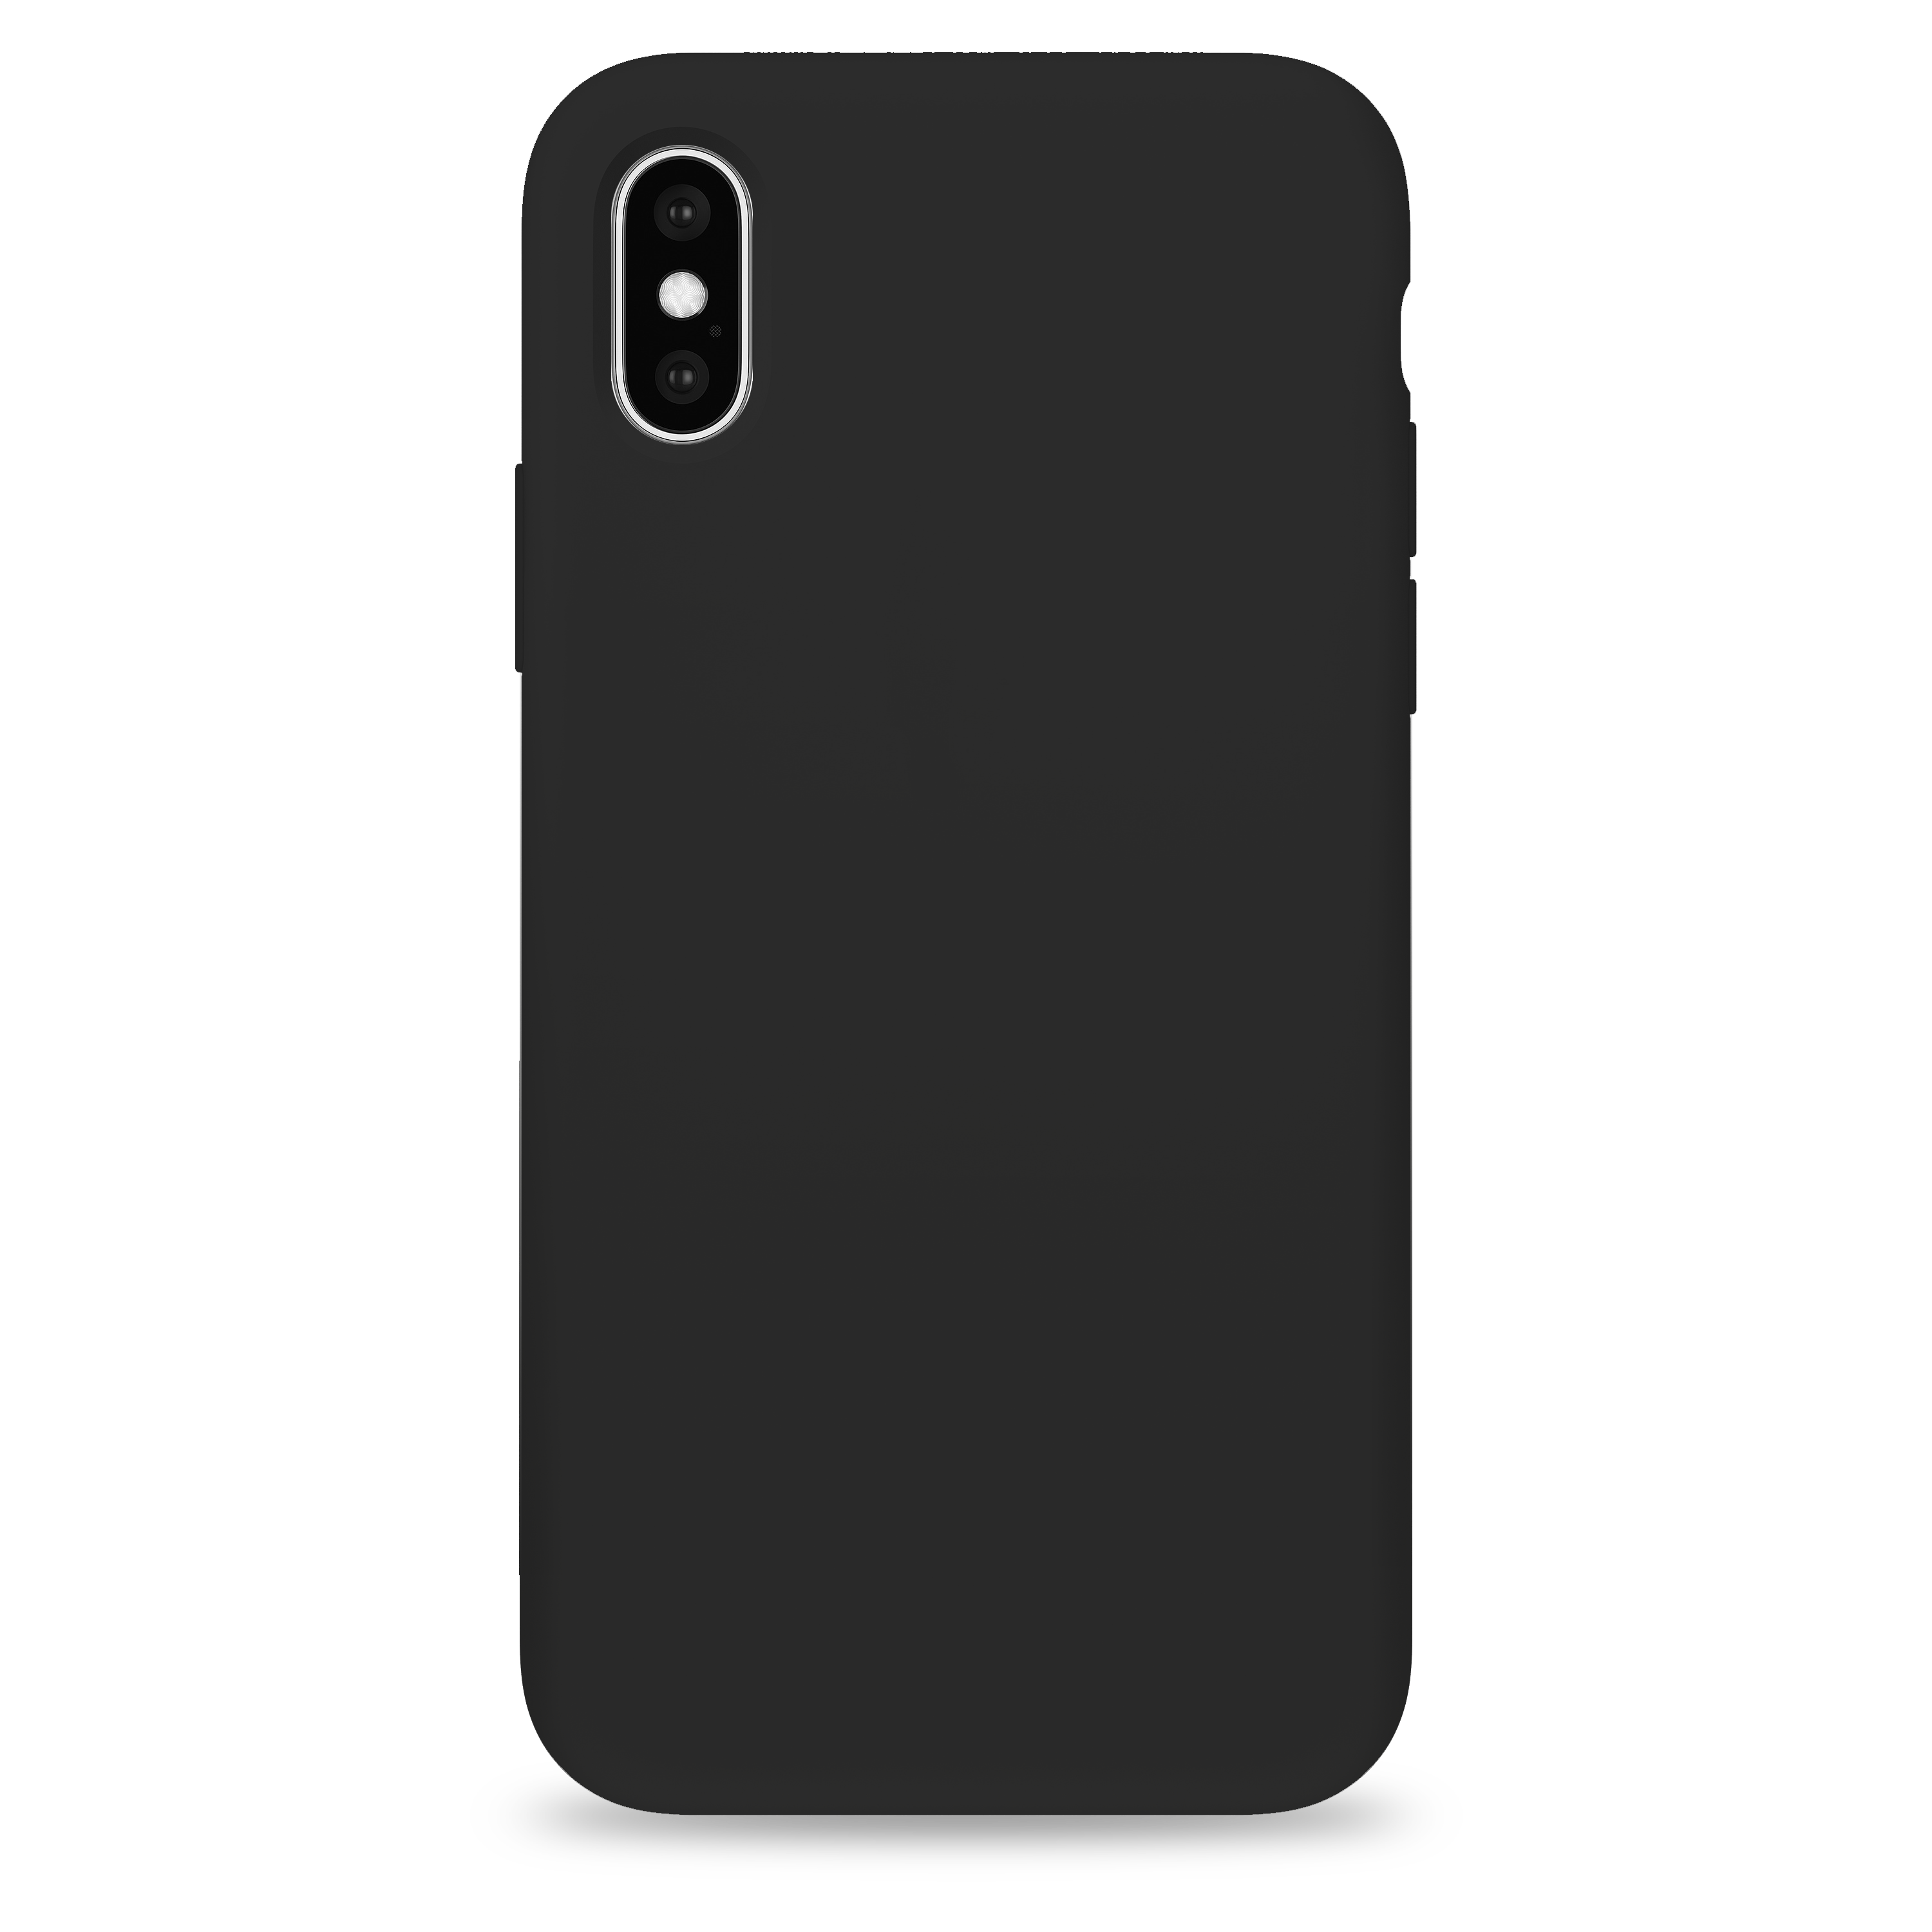 iPhone XS Max silicone case